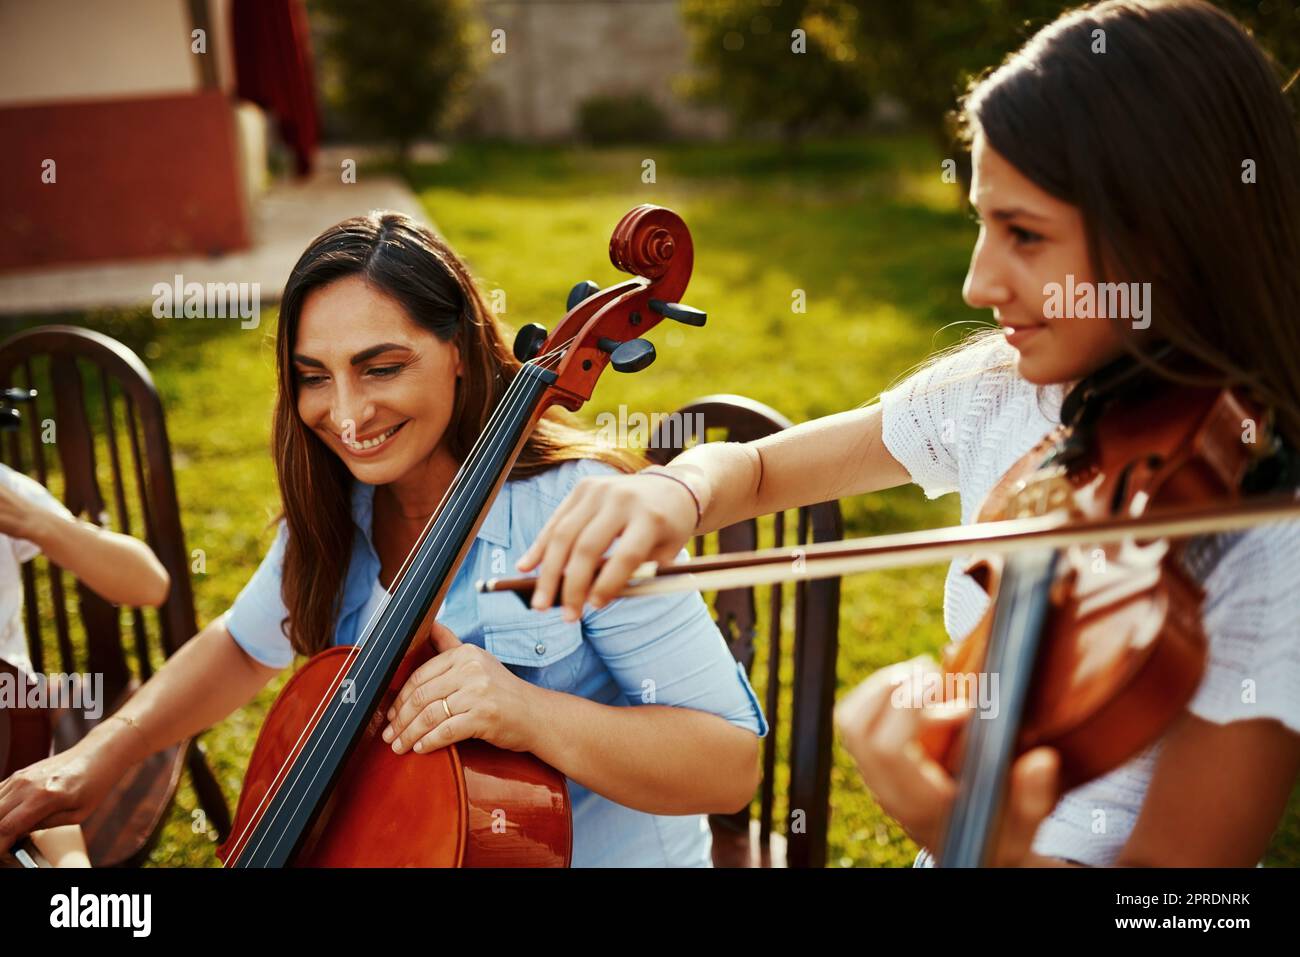 Playing music with her daughter brings her joy. a beautiful mother playing instruments with her adorable daughter outdoors. Stock Photo